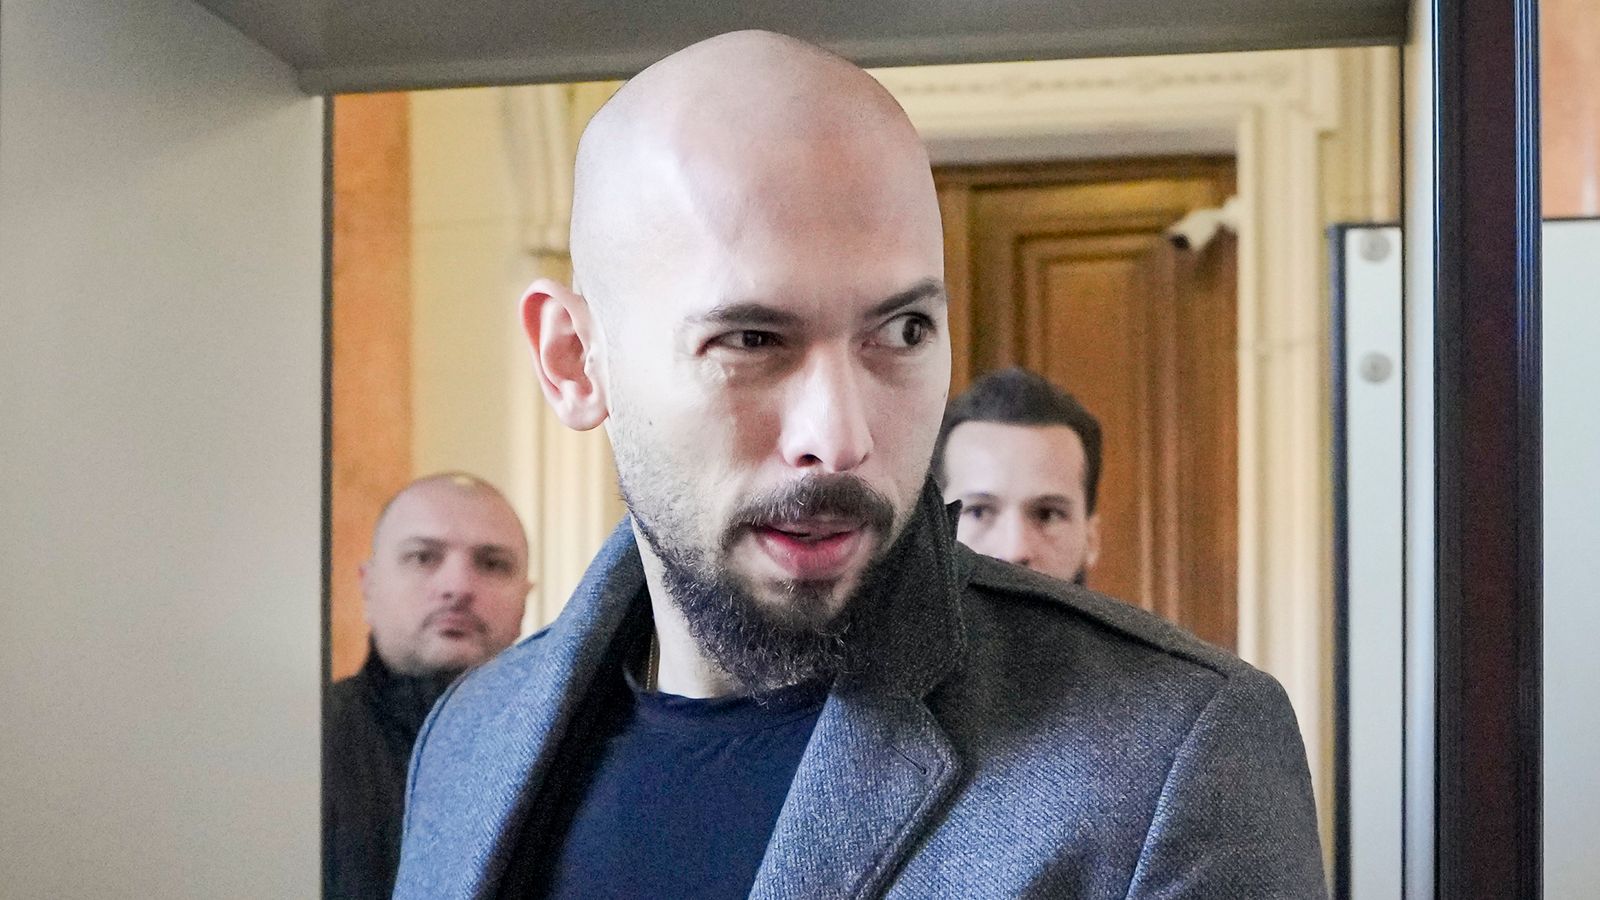 Court in Romania Allows Trial of Social Media Influencer Andrew Tate Accused of Human Trafficking and Rape to Proceed